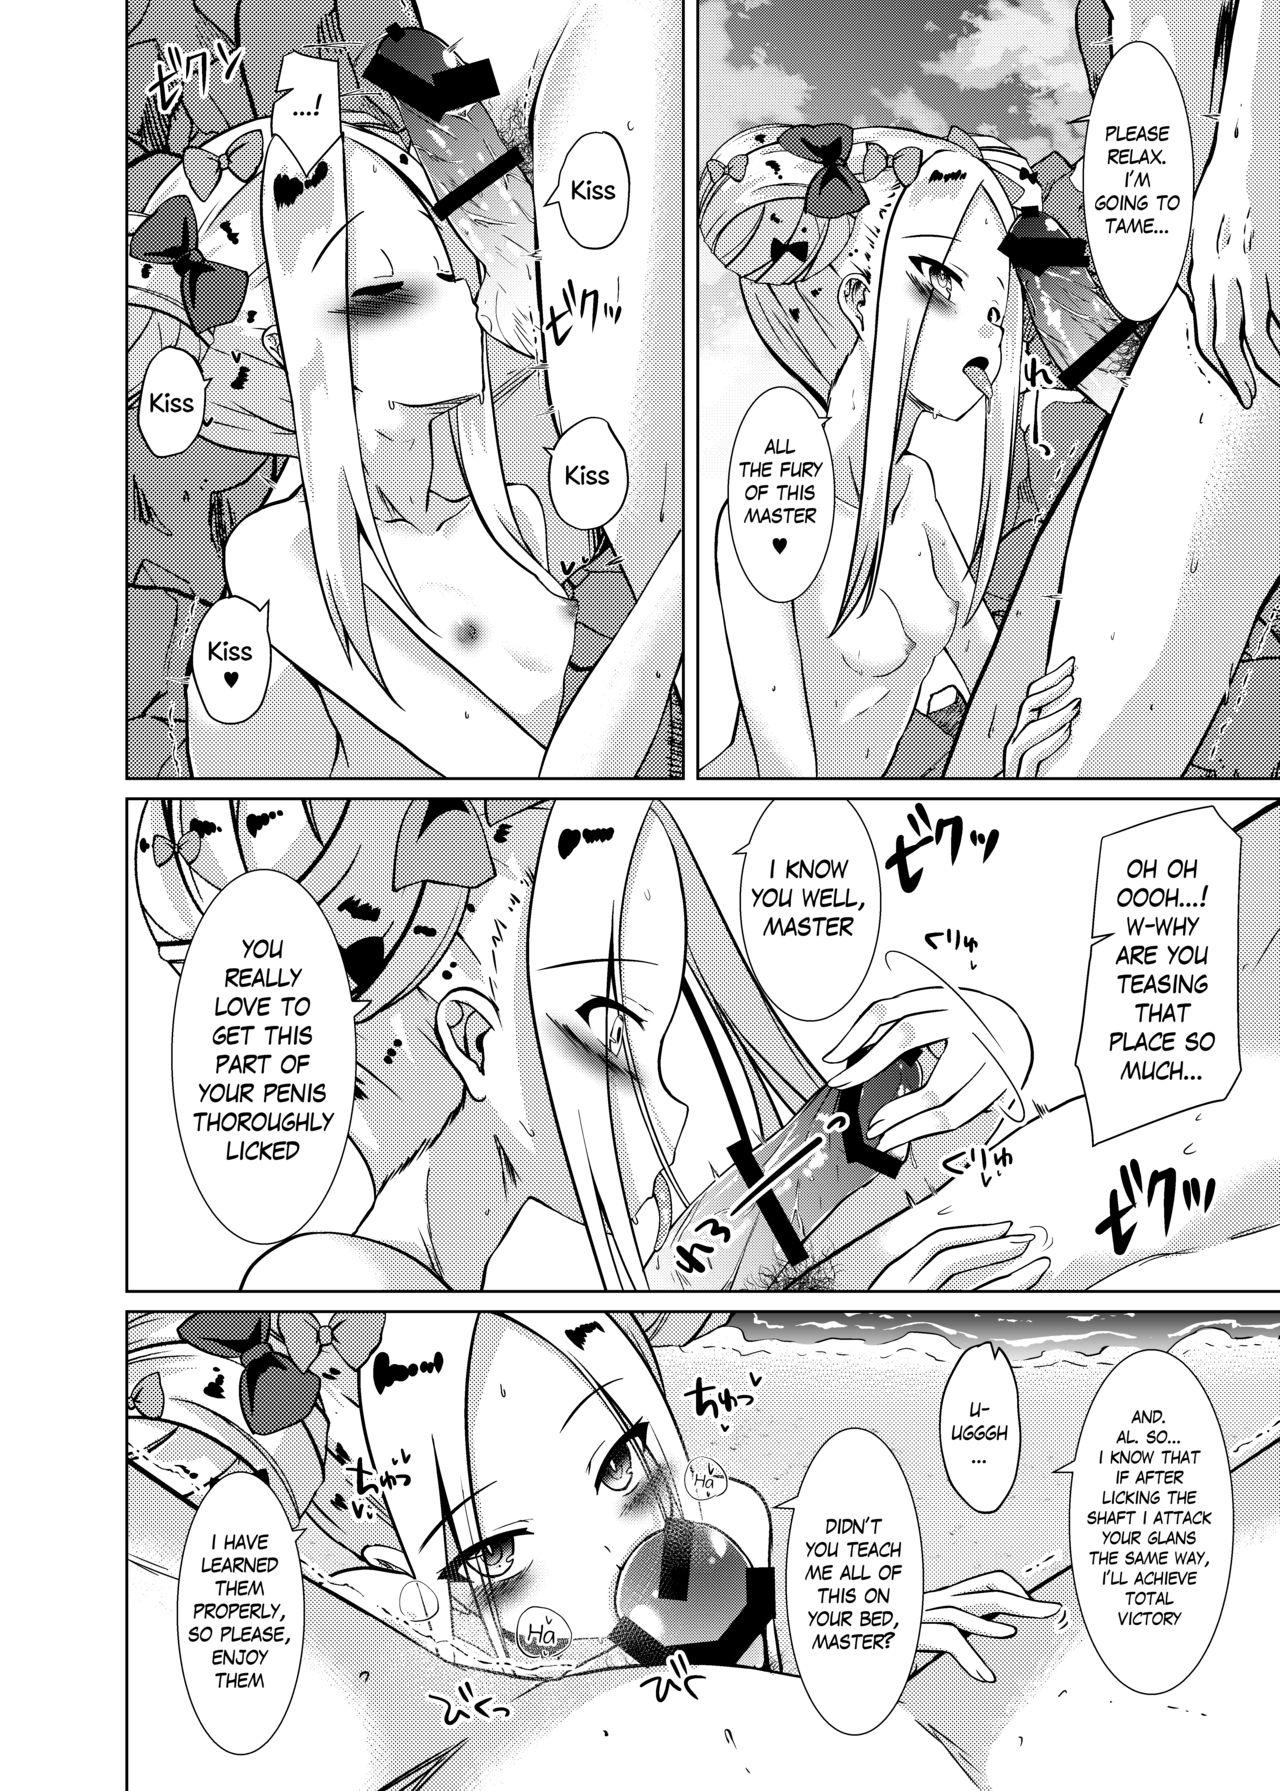 Old Man [Sakura Garden (Shirosuzu)] Chaldea Outdoor Challenge Abby-chan to Issho 2 | Chaldea Outdoor Challenge with Abby-chan 2 (Fate/Grand Order) [English] [The Blavatsky Project] [Digital] - Fate grand order Gay Fetish - Page 7